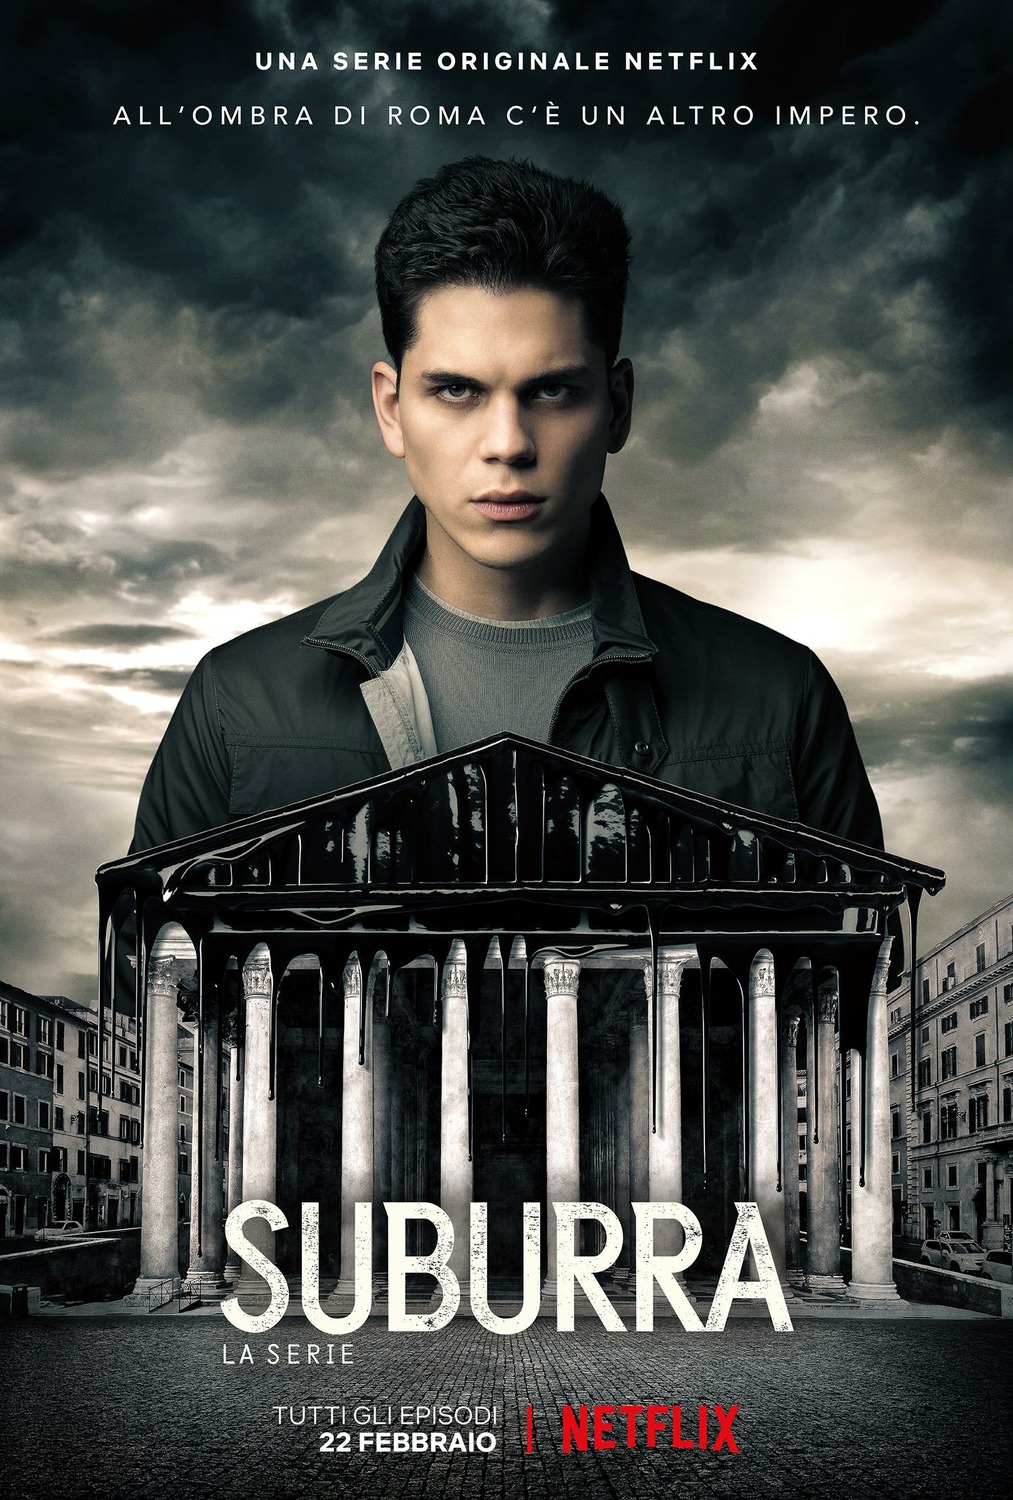 Extra Large TV Poster Image for Suburra: la serie (#7 of 12)